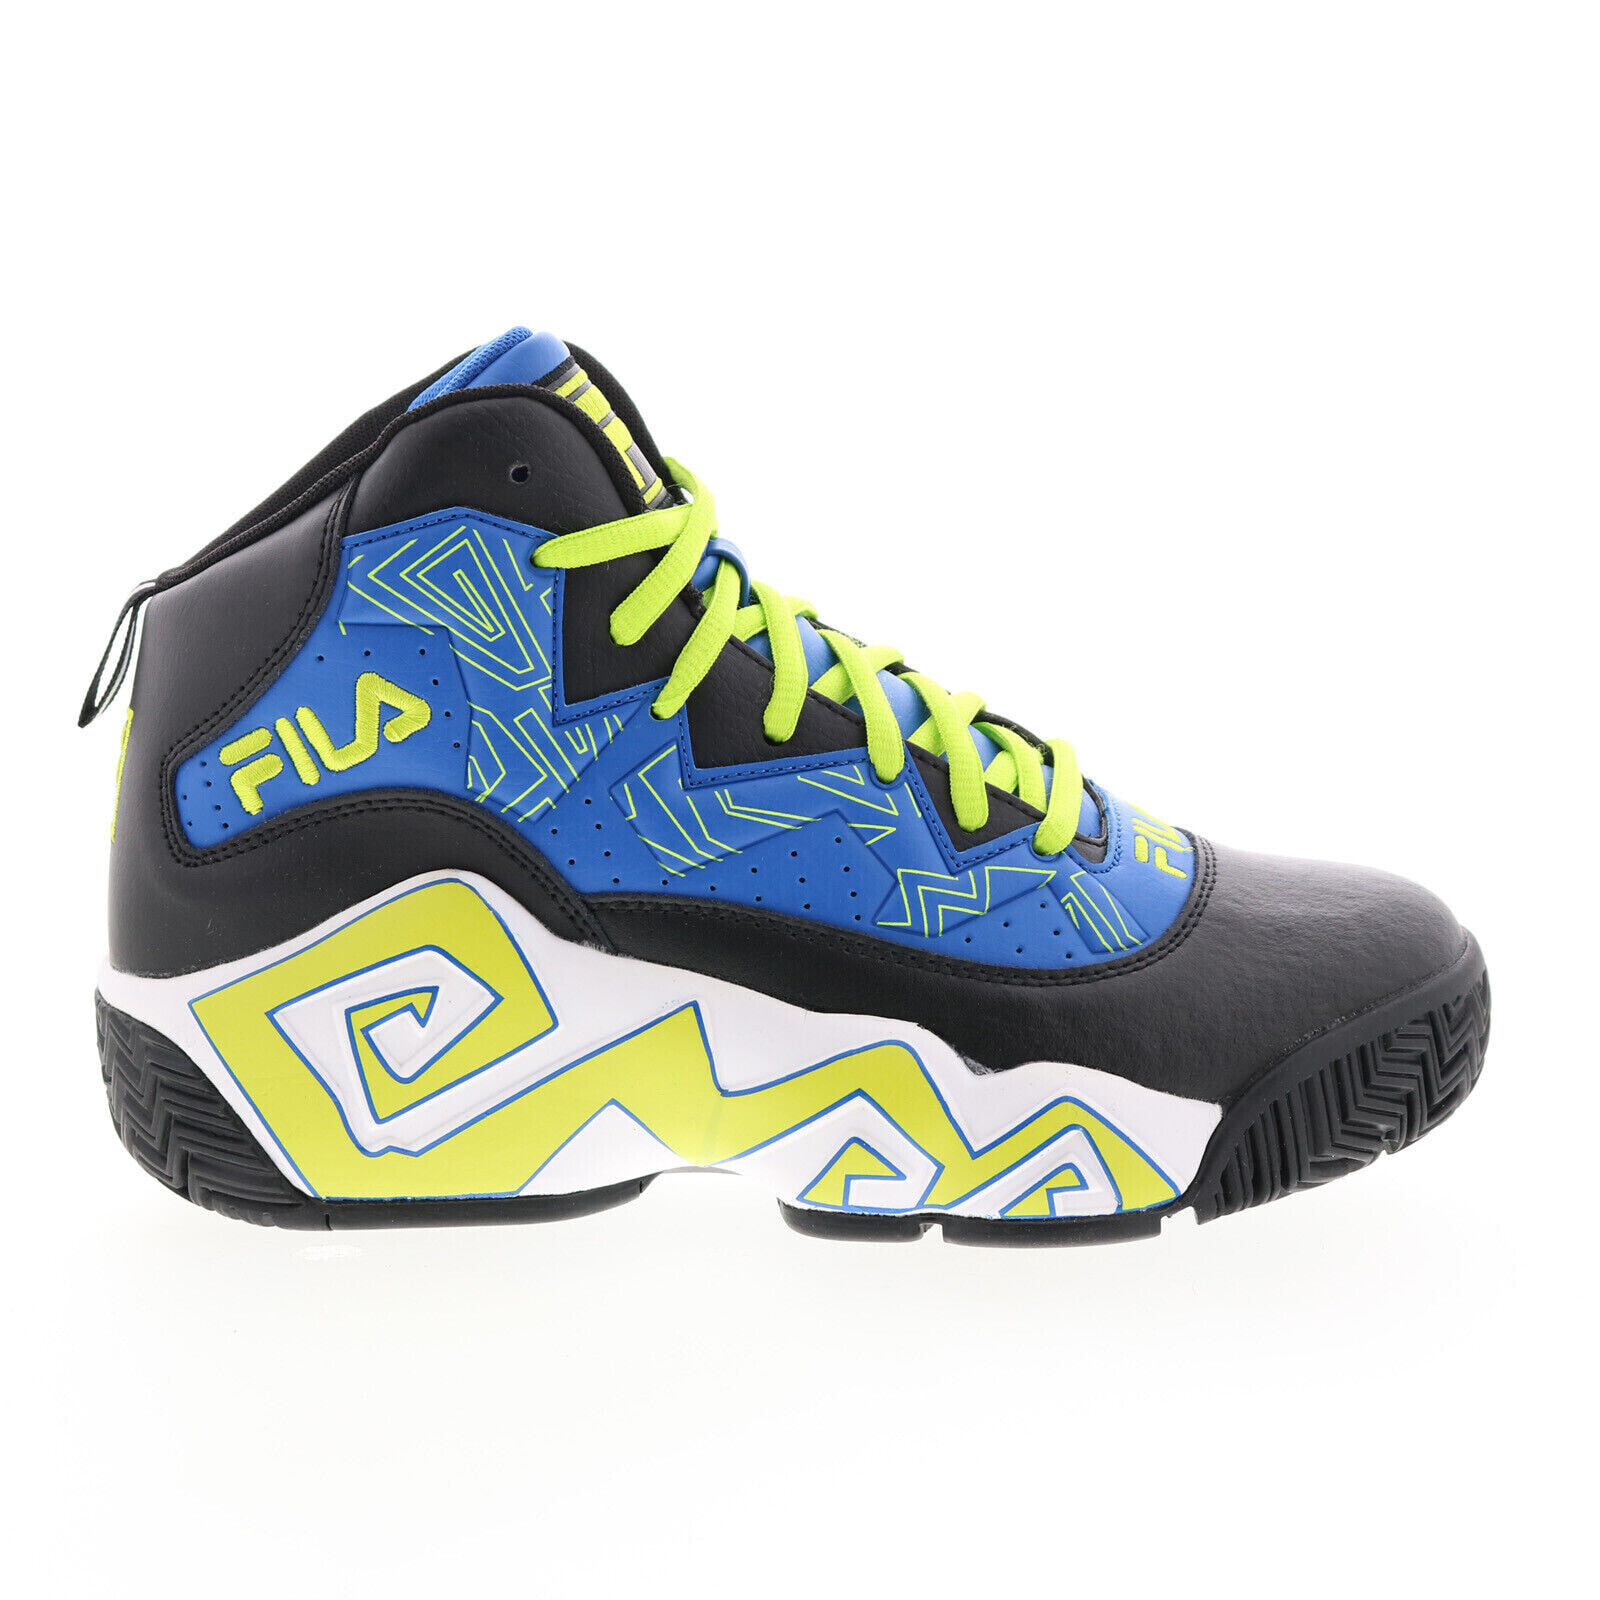 Fila MB 1BM01794-405 Mens Black Leather Lace Up Athletic Basketball Shoes 9